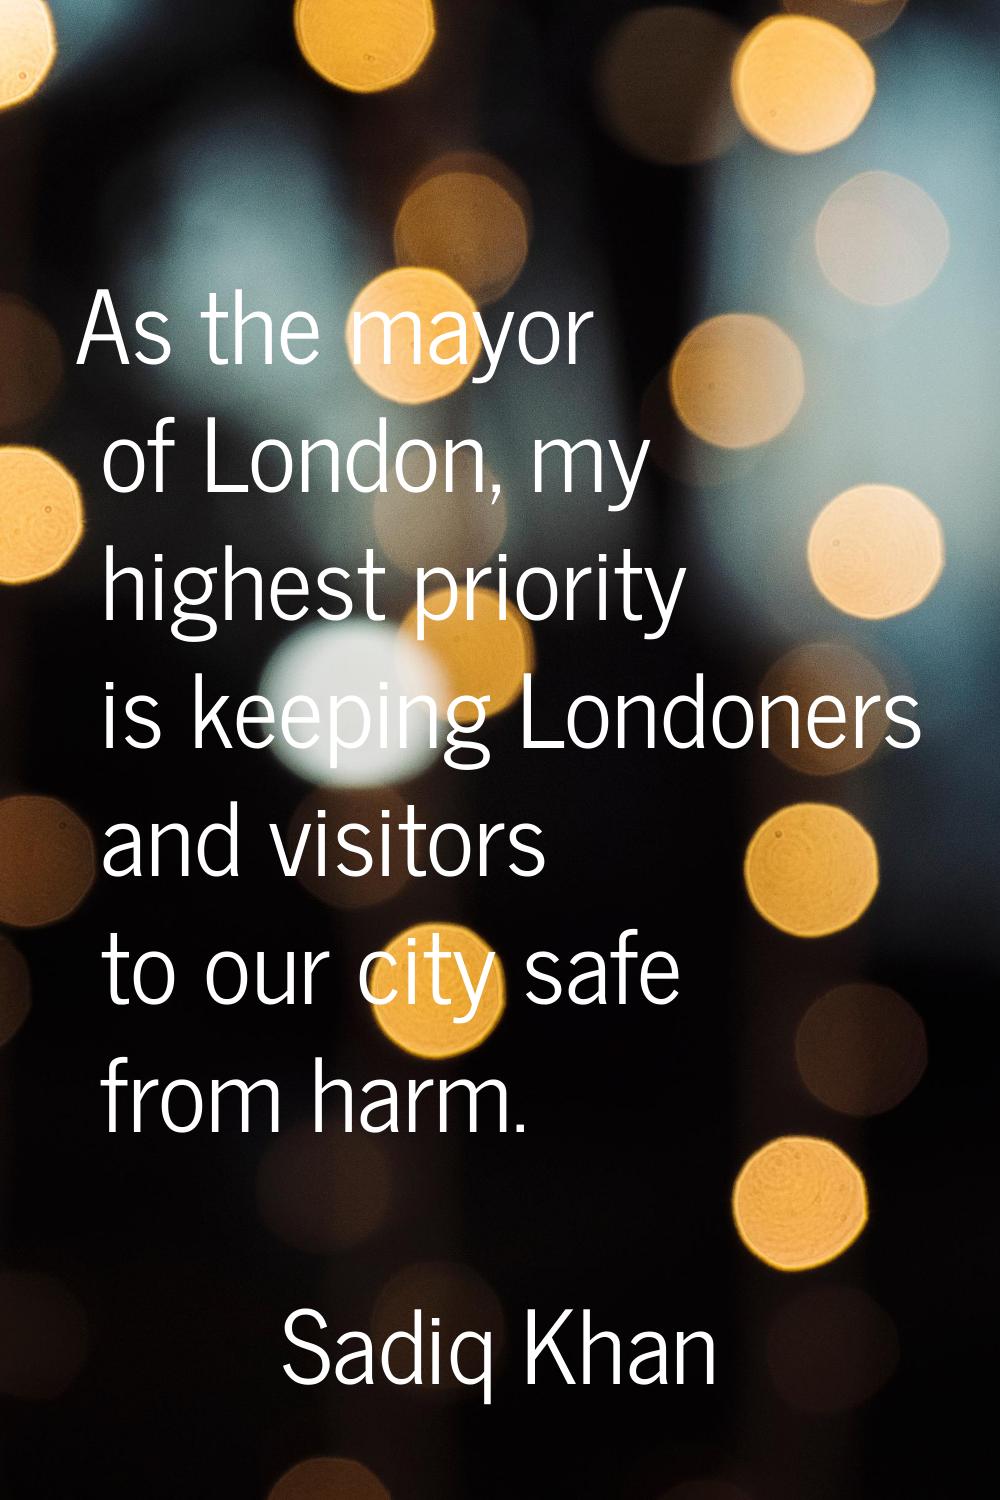 As the mayor of London, my highest priority is keeping Londoners and visitors to our city safe from